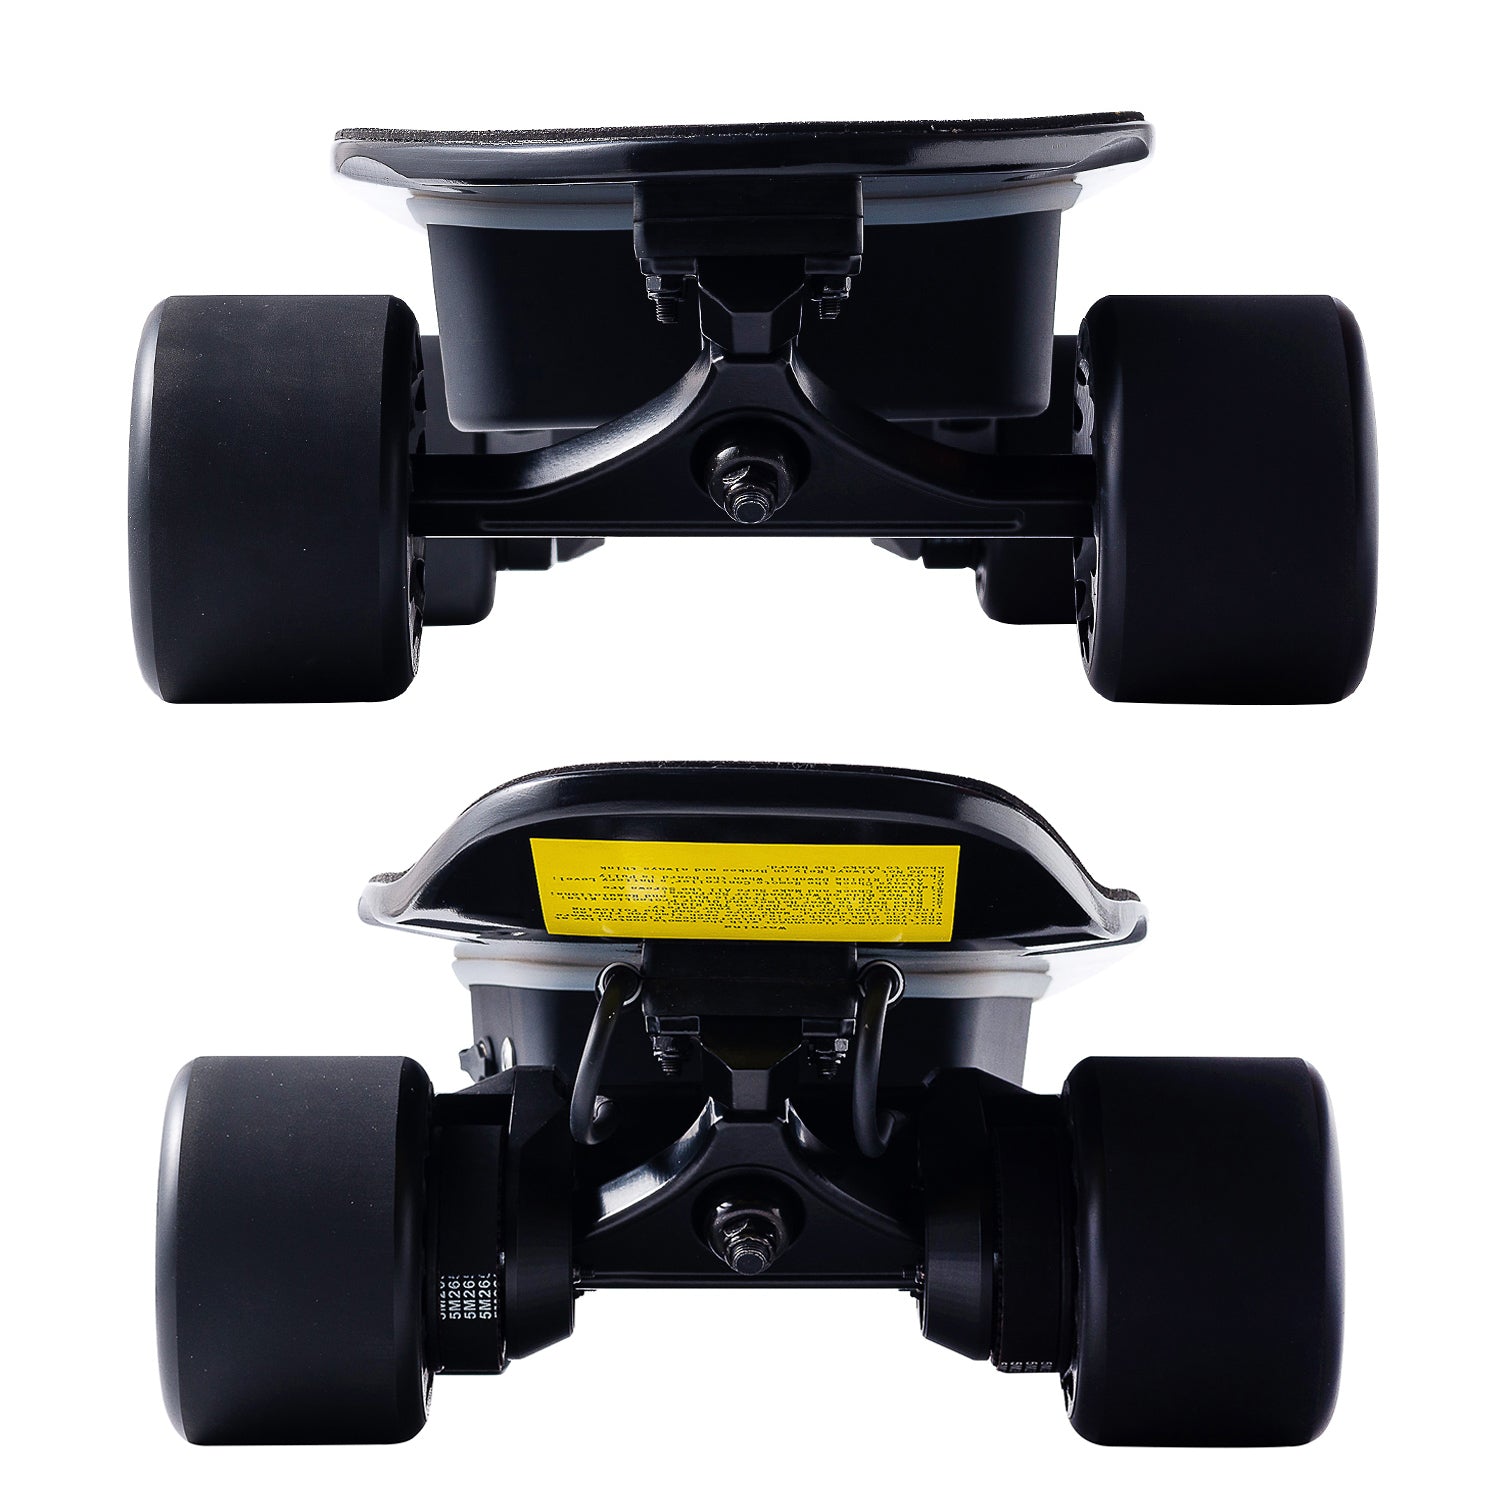 (New Year Bliss) Verreal ACE Electric Skateboards & Longboards